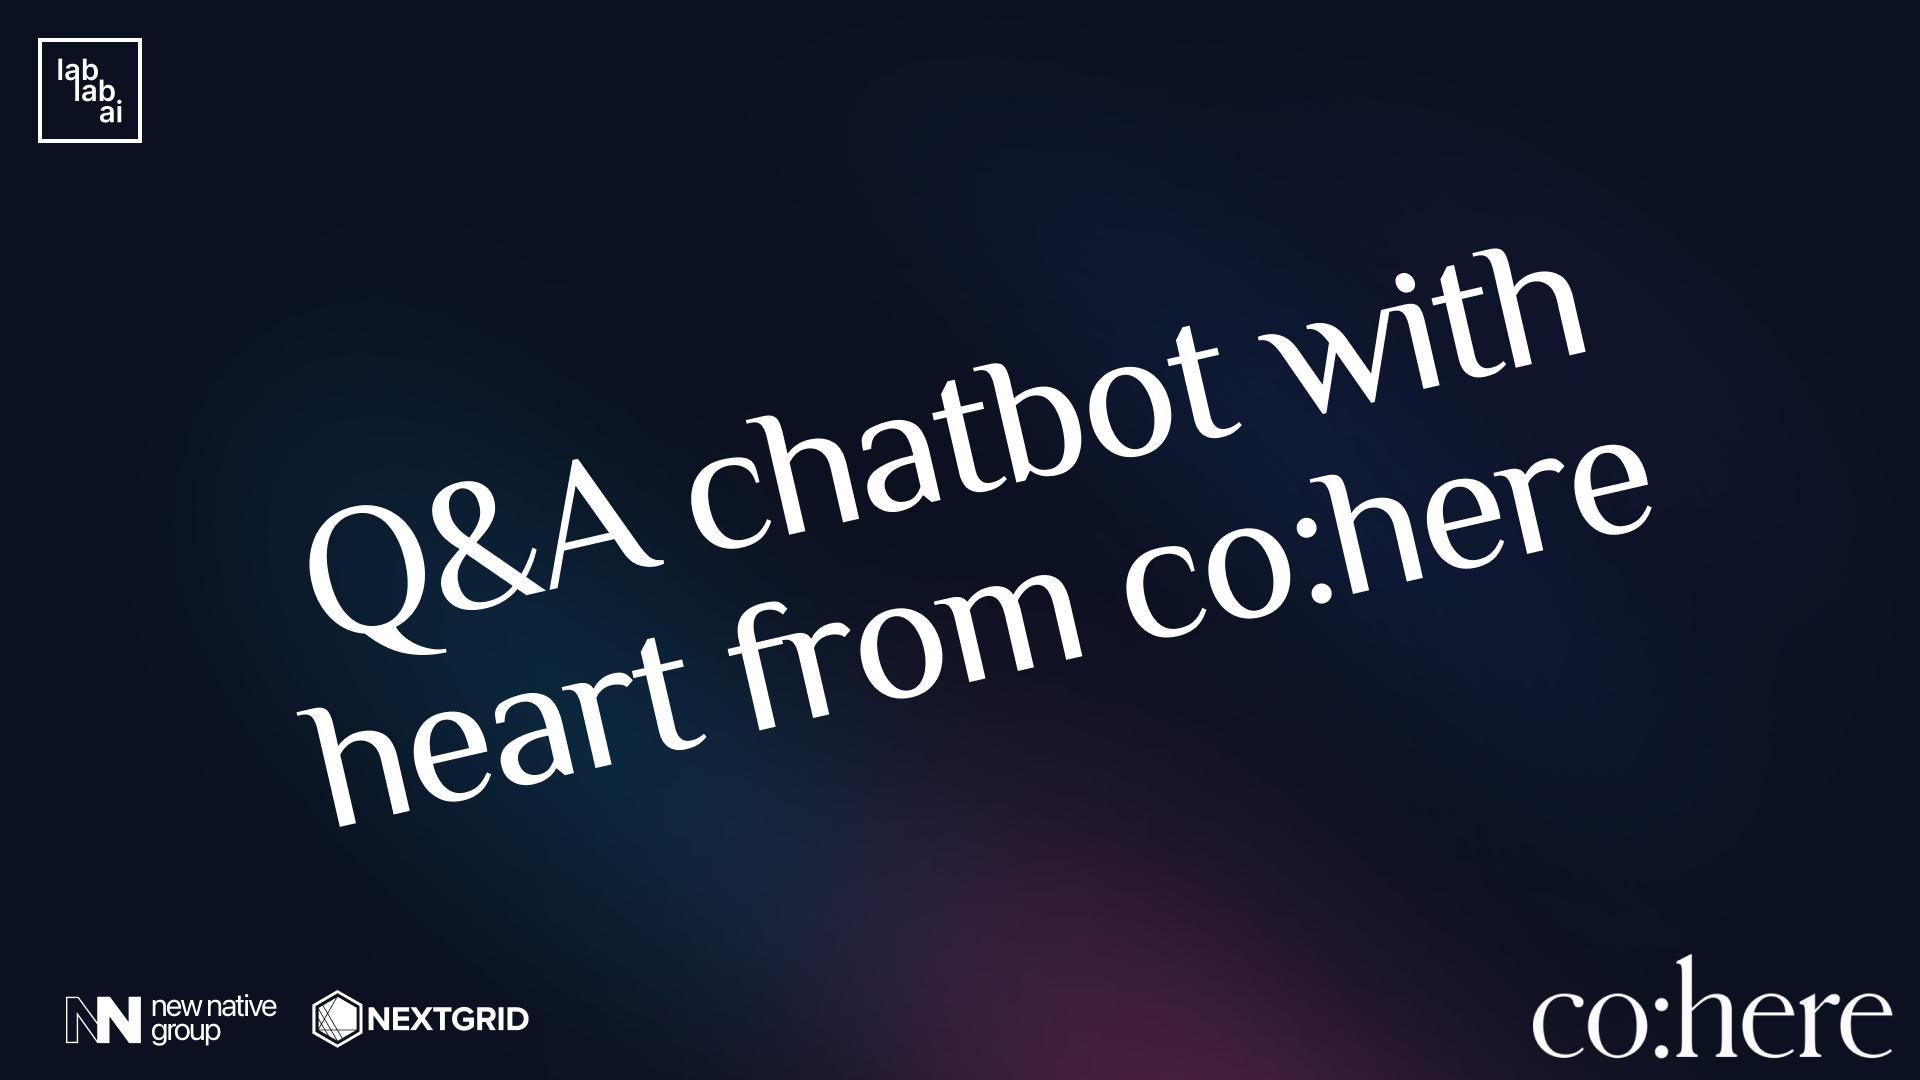 Cohere tutorial: Q&A chatbot with heart from Cohere